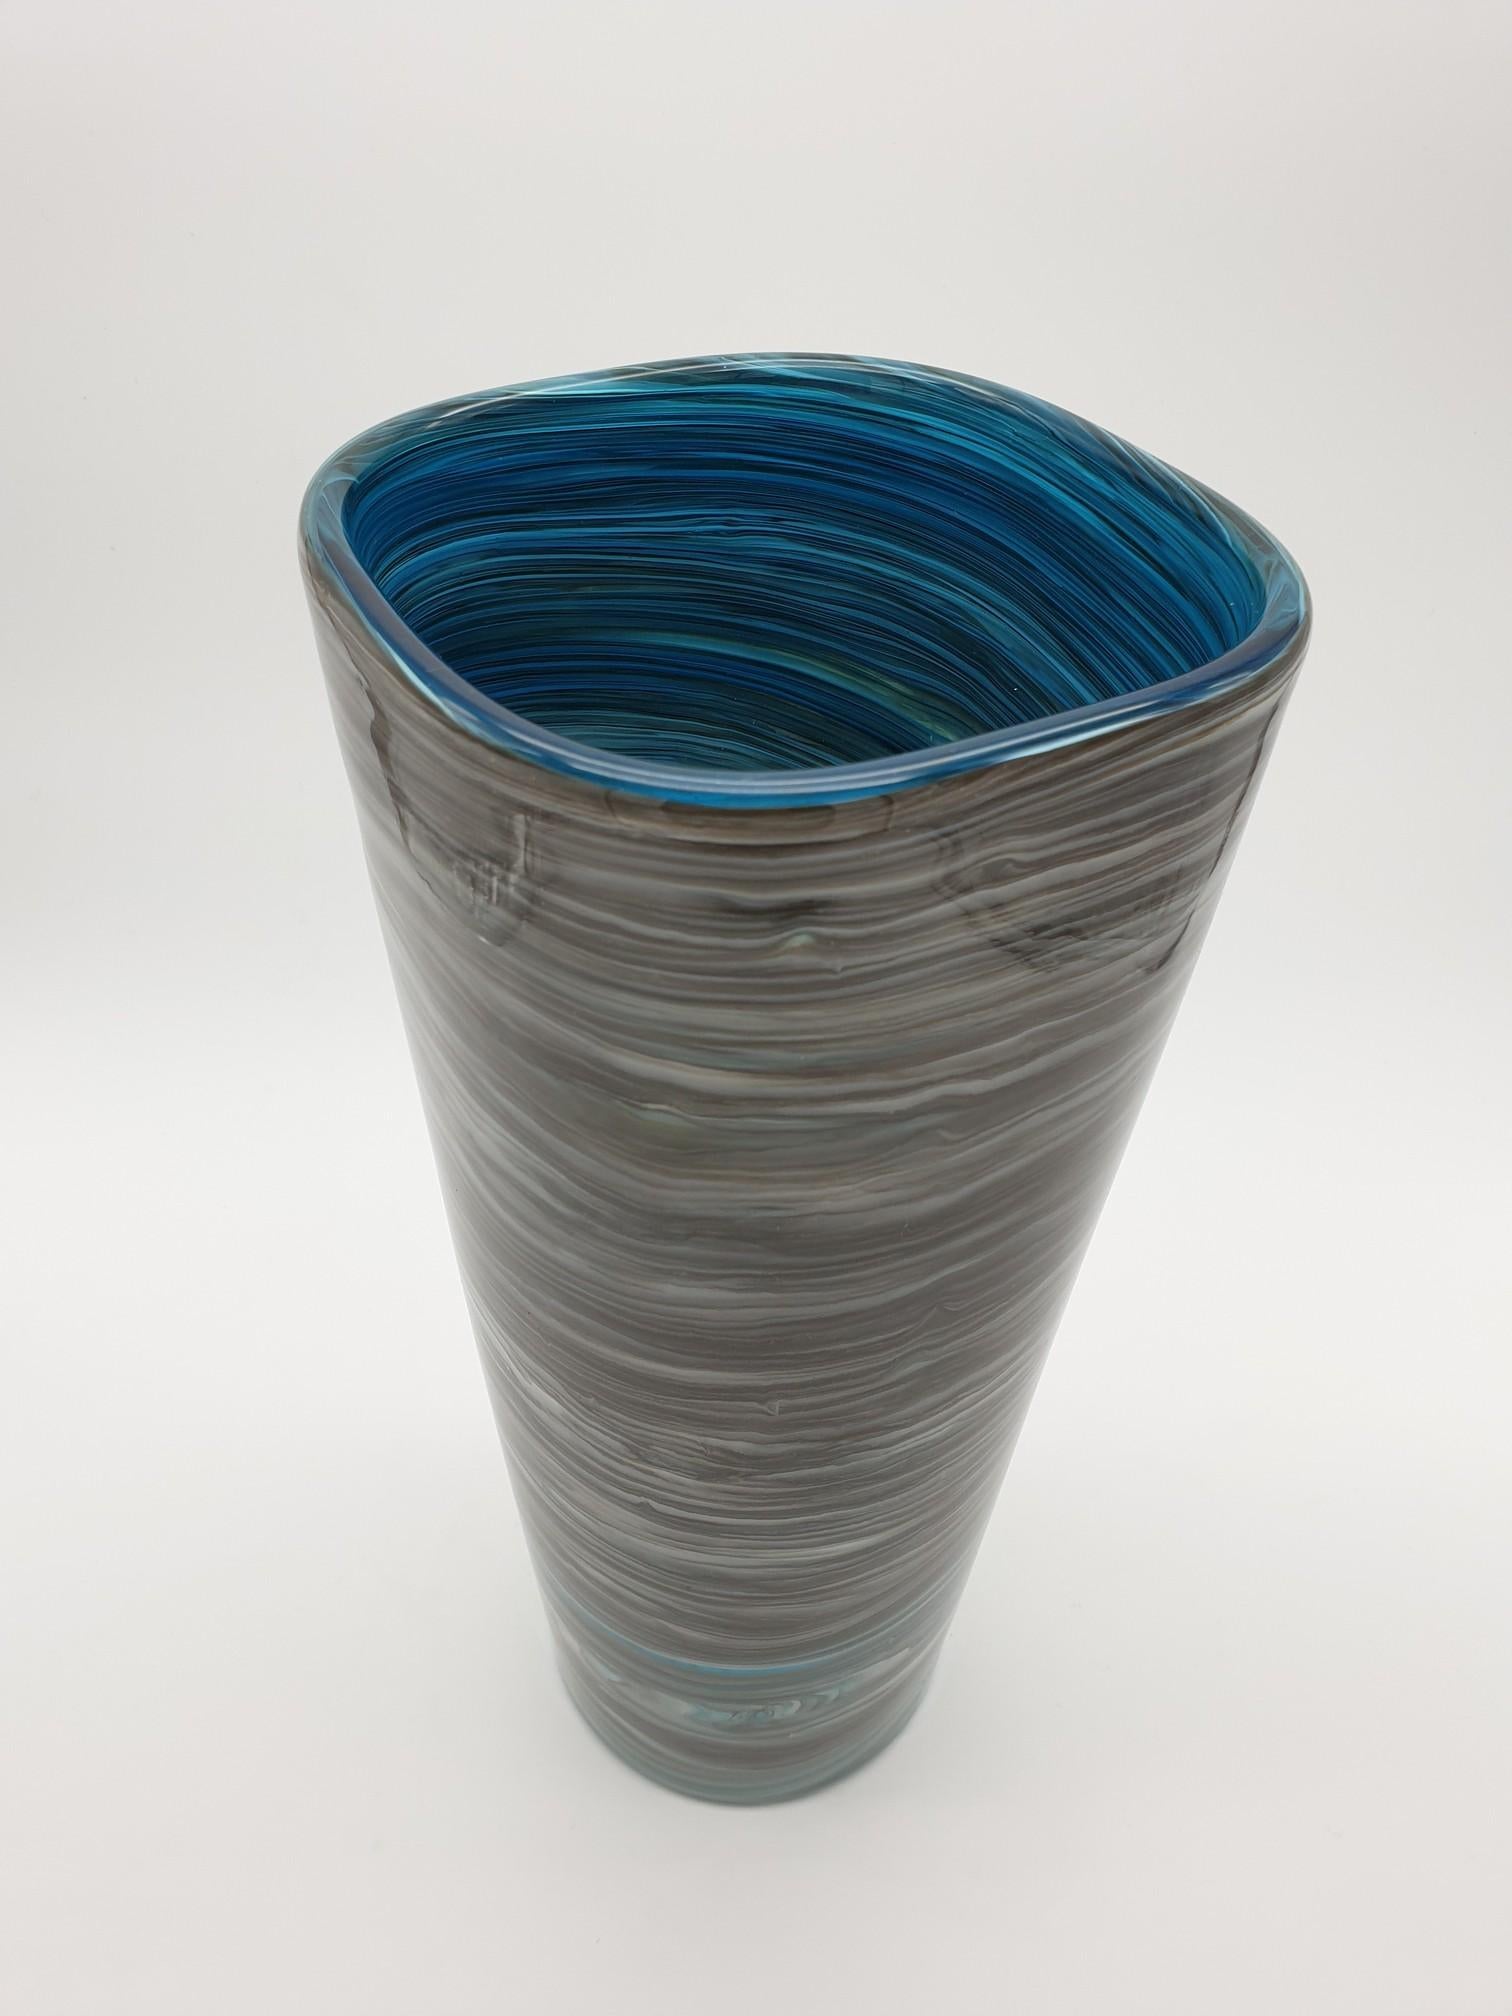 Late 20th Century Modern Stylish Marbled Gray Murano Glass Vase by Cenedese, late 1990s For Sale